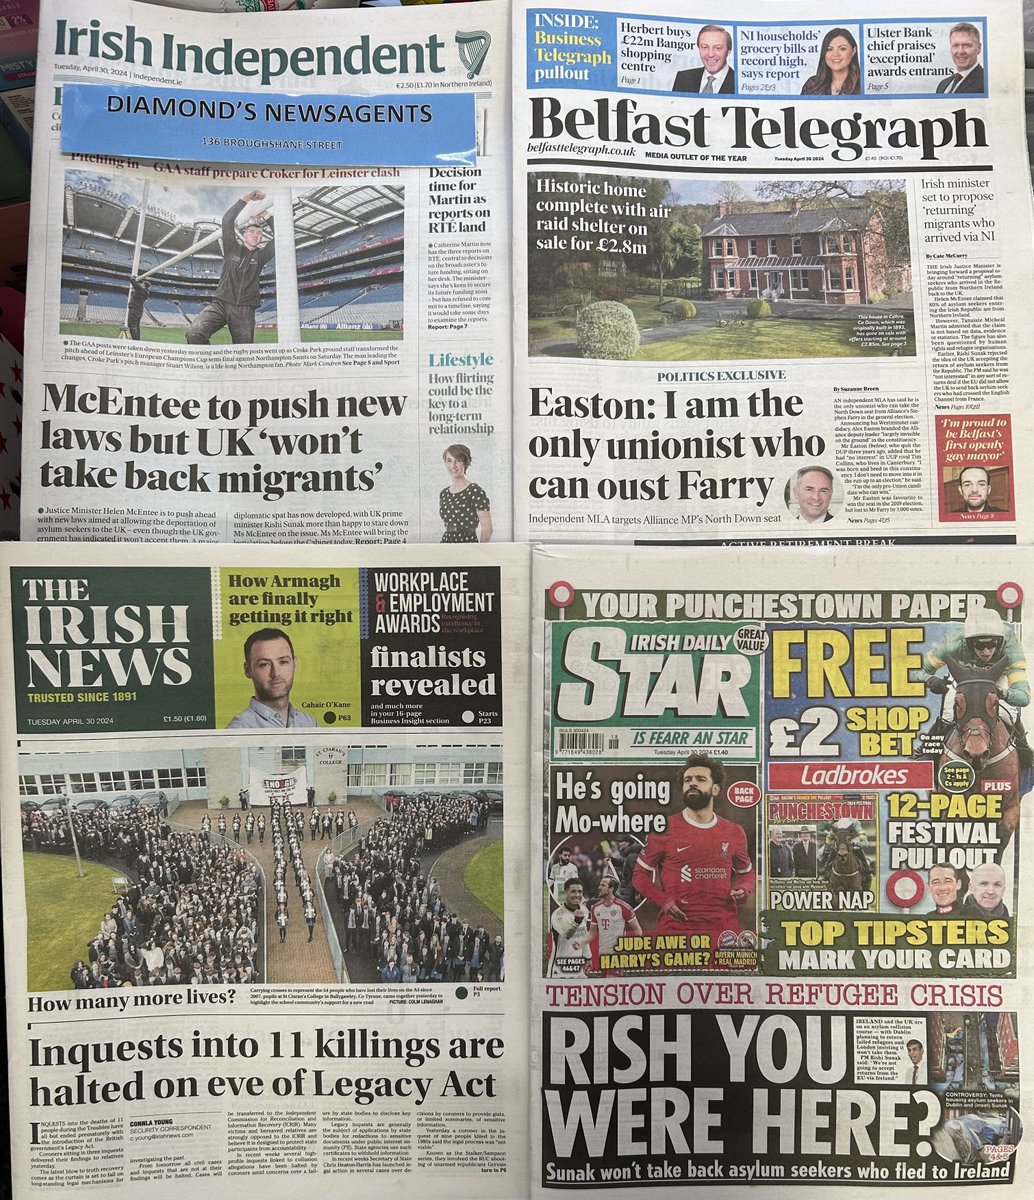 TUESDAY 30-4-23 ….. 6.30am THESE ARE THE ONLY NEWSPAPERS AVAILABLE SO FAR THIS MORNING IN BALLYMENA……#BuyANewspaper